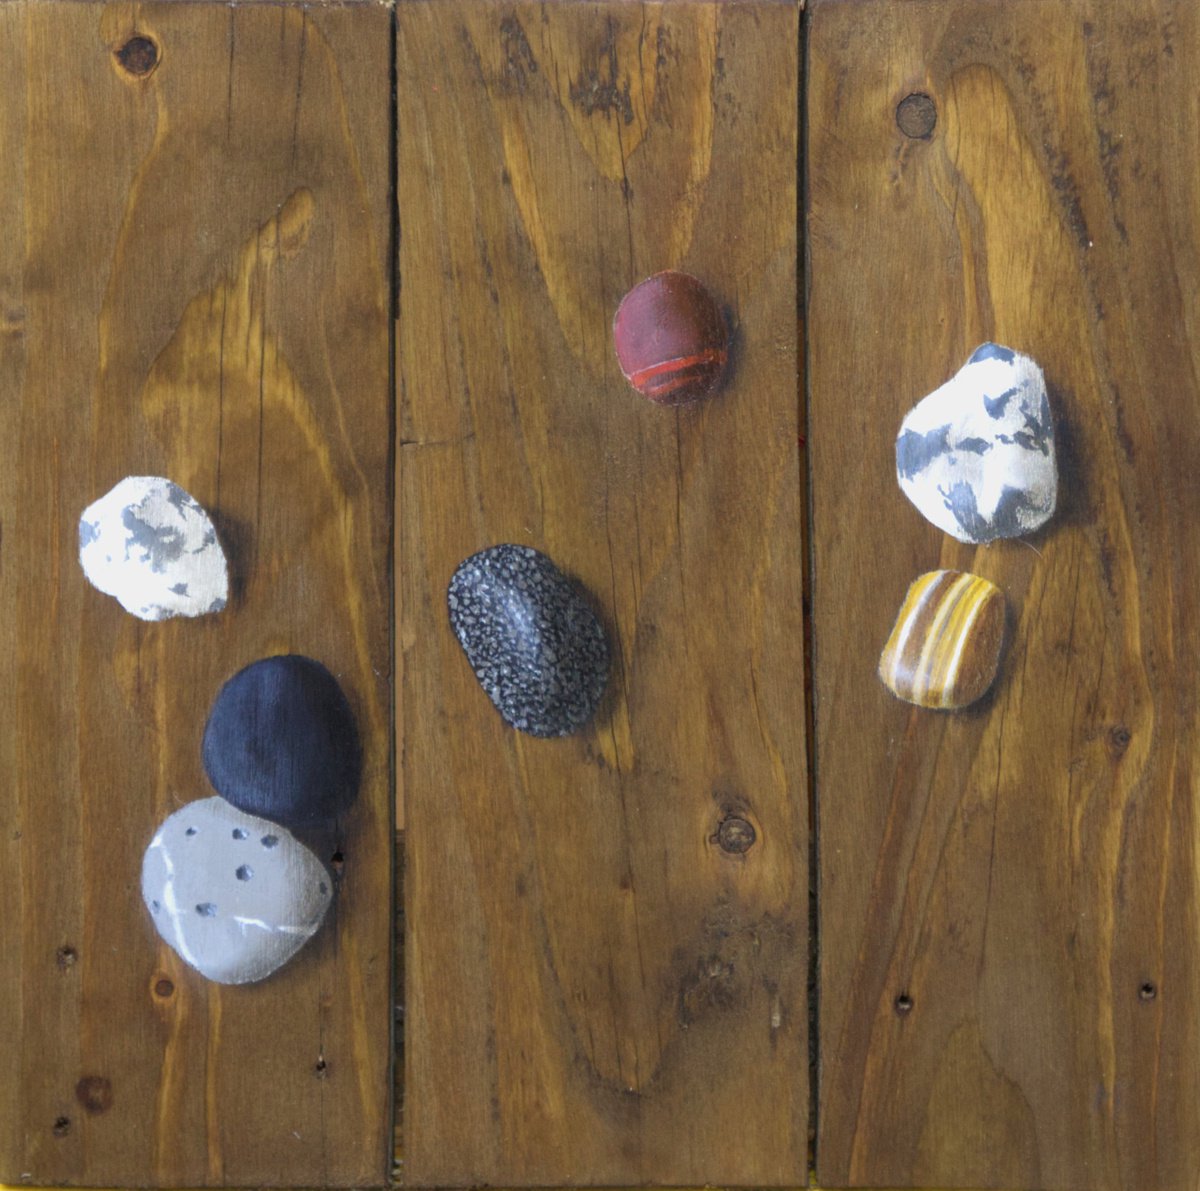 Stones on recycled wood by Mike Skidmore